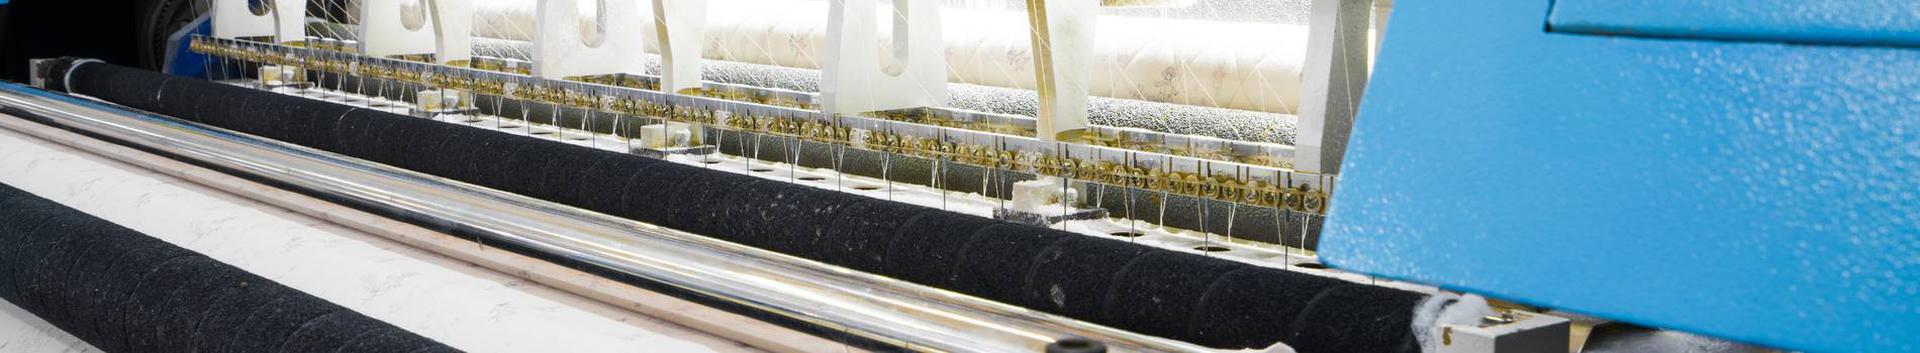 textile industry and other related services, products, consultations